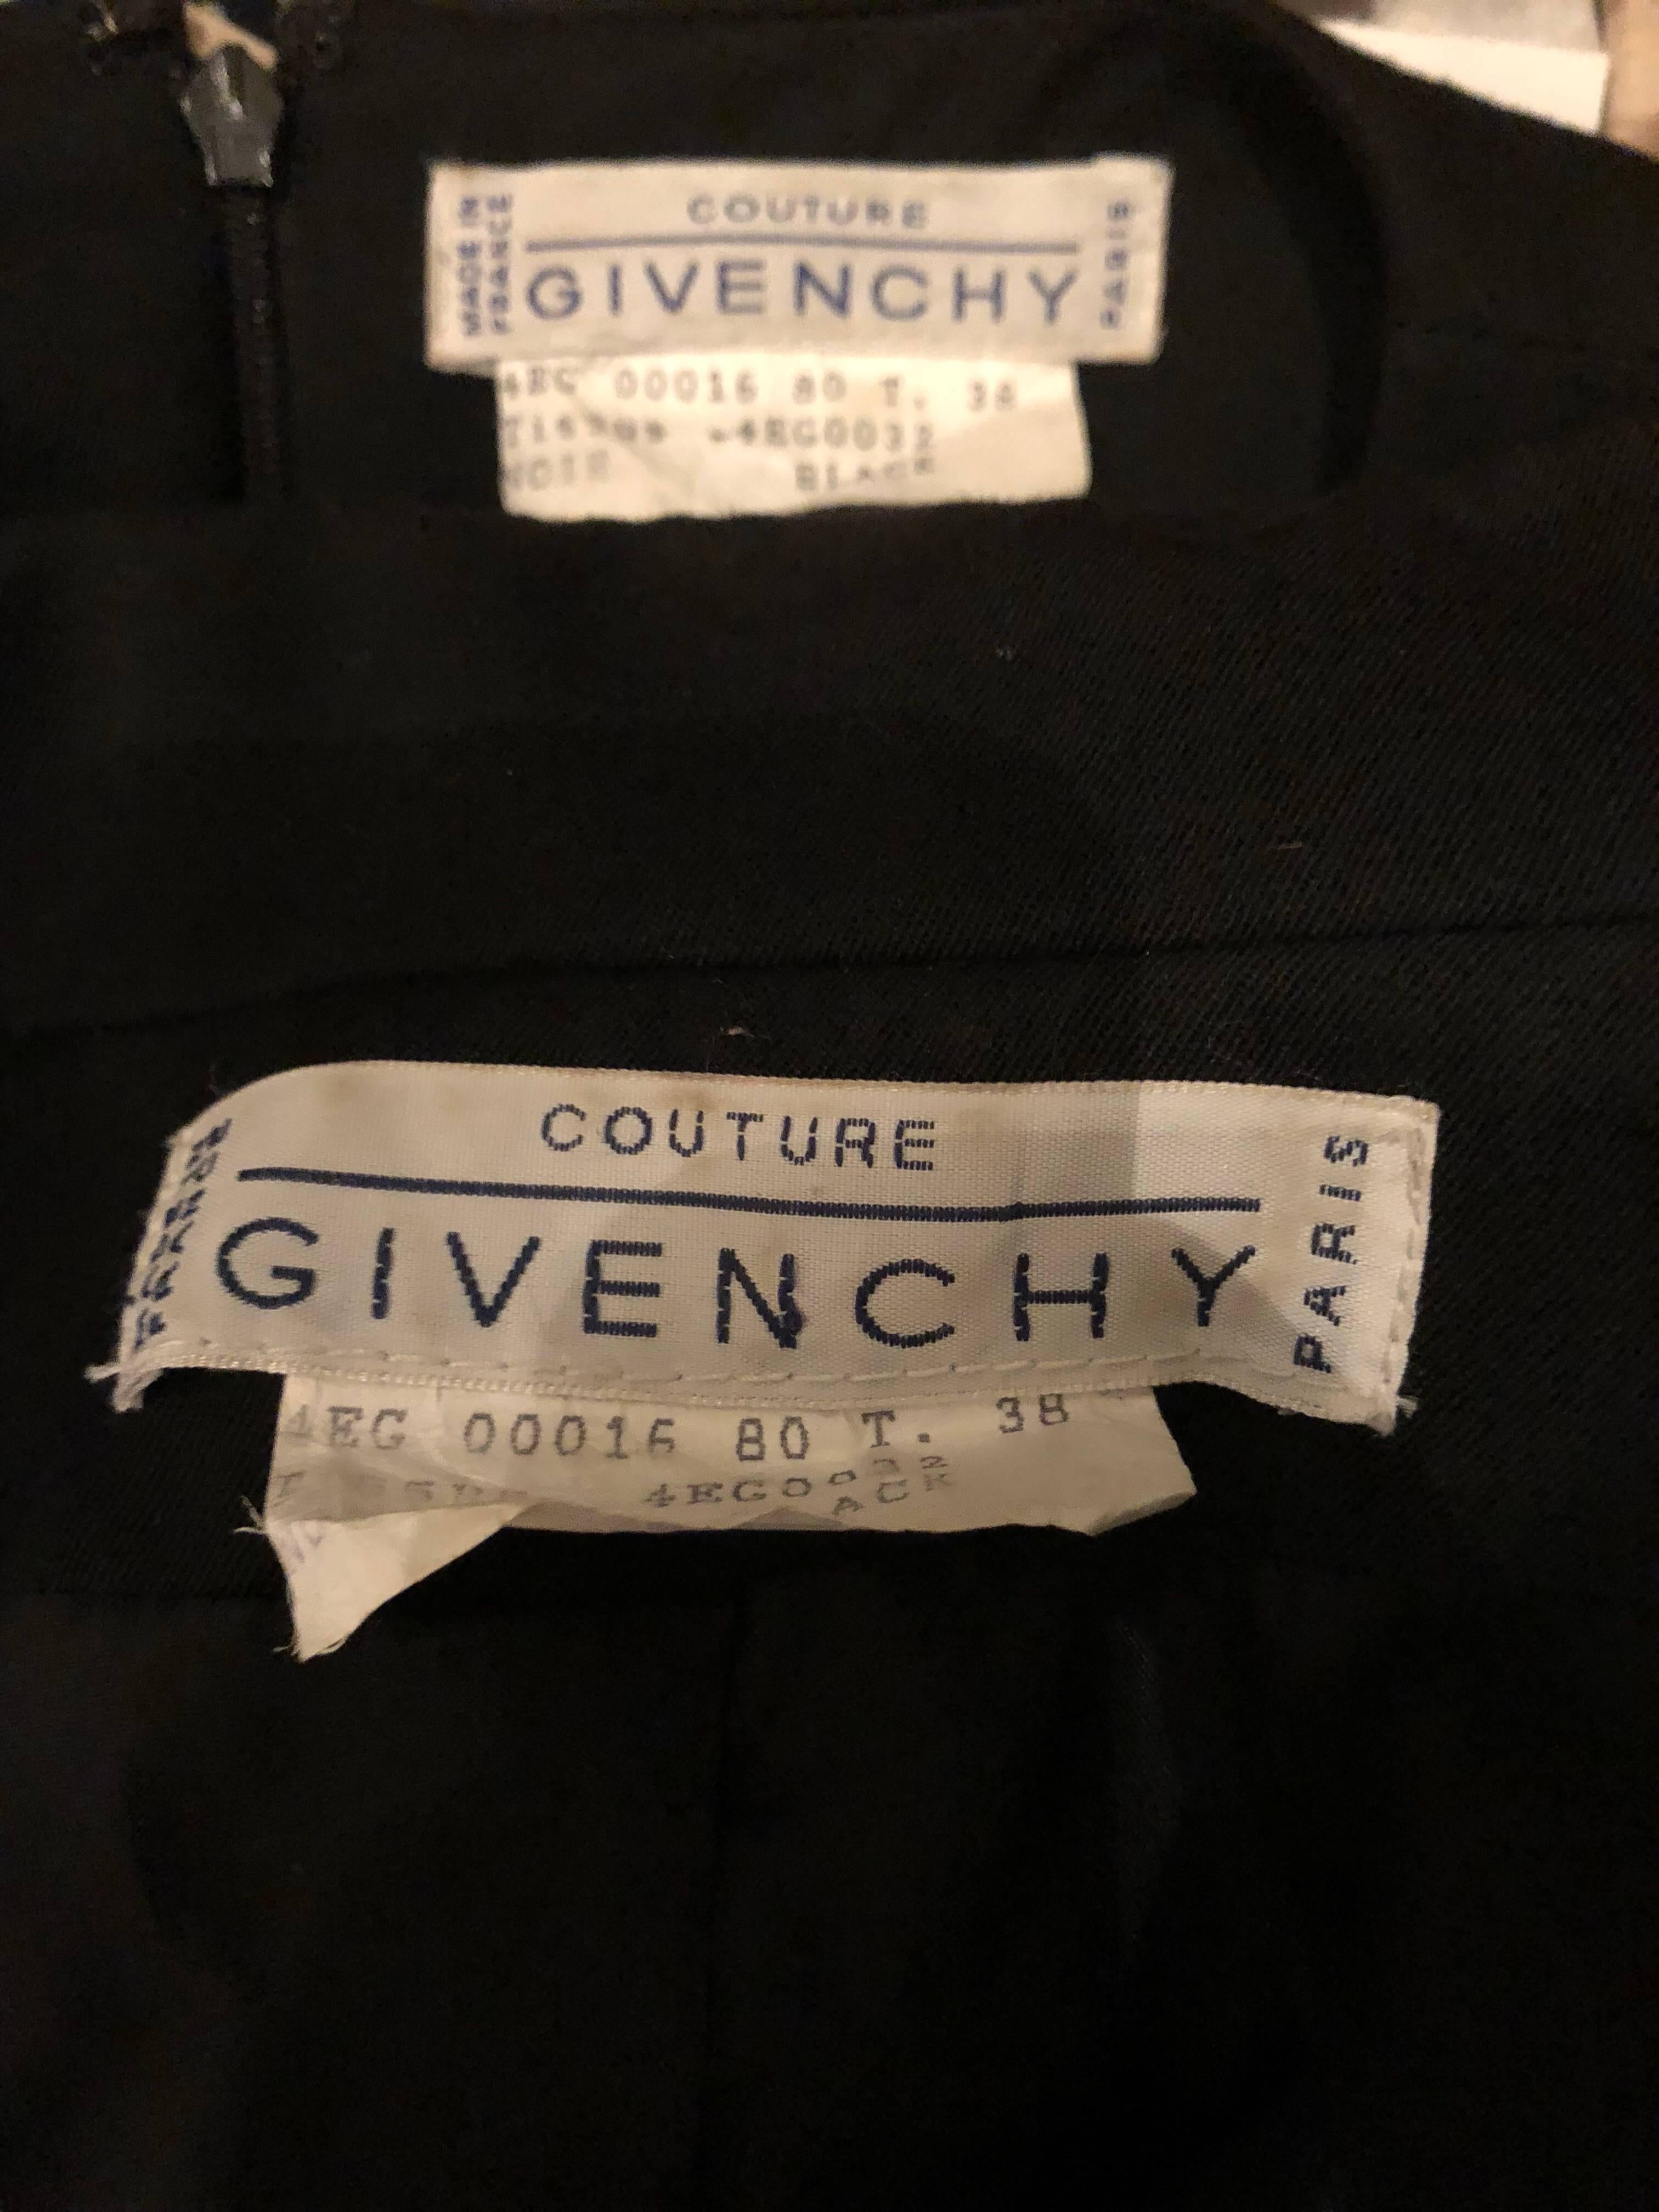 Alexander McQueen for Givenchy Couture Vintage Black Jumpsuit + Cropped Jacket  5